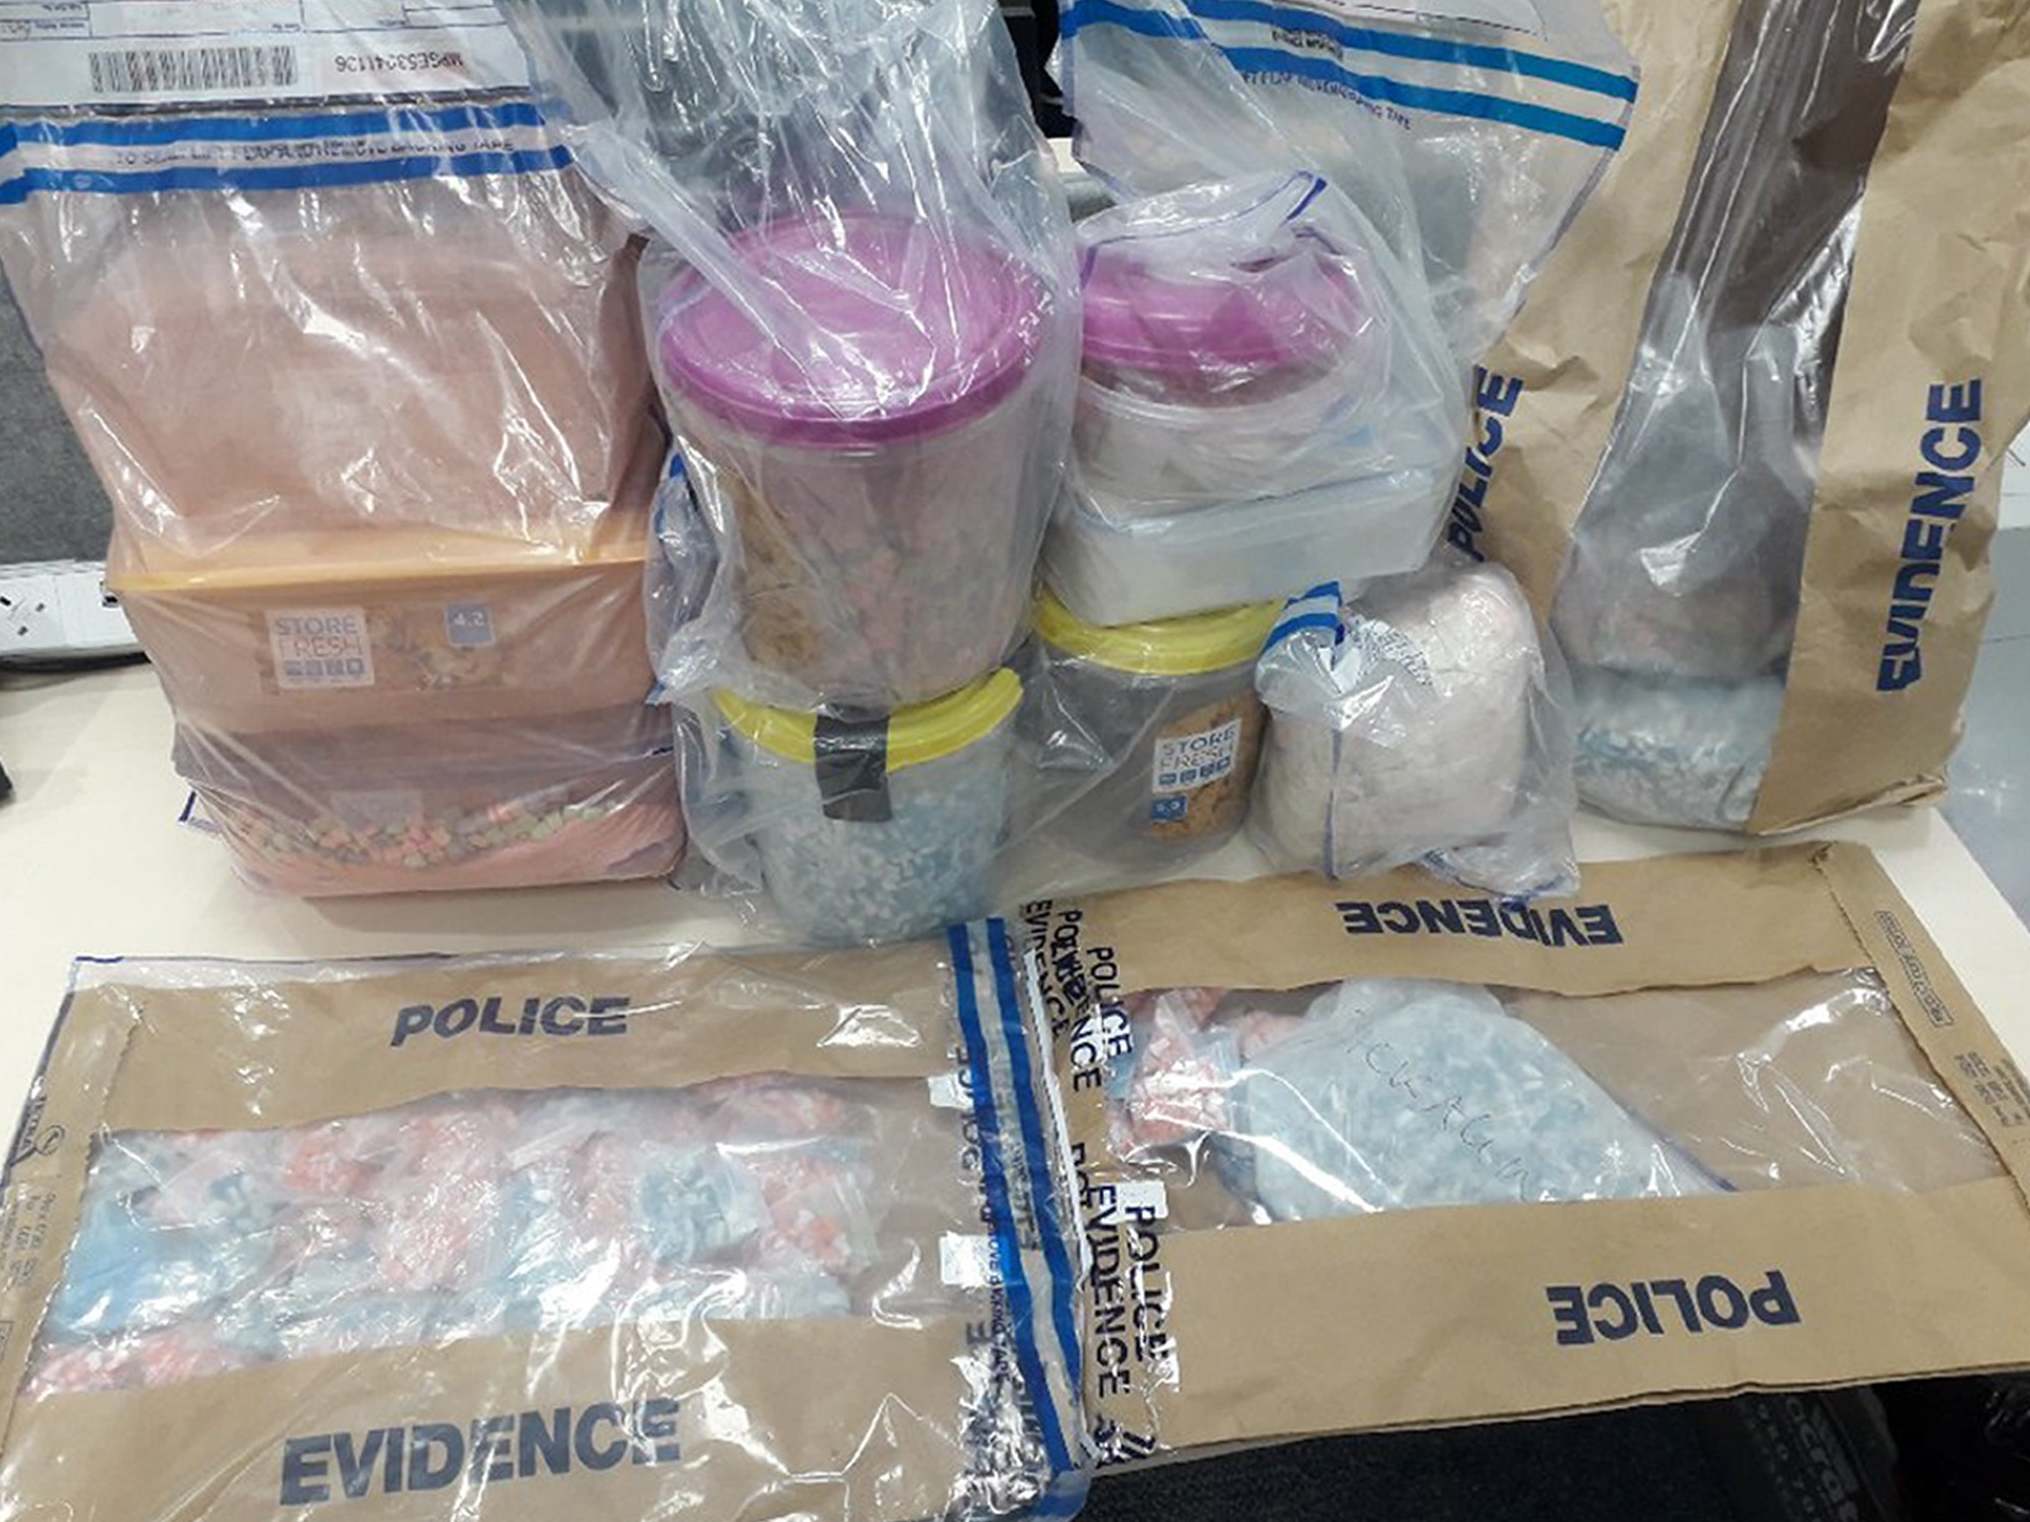 Police found several kilogrammes of crystal meth, MDMA and cocaine, 185,000 ecstasy pills and over 10,000 LSD tabs at Patrick Scotland's address